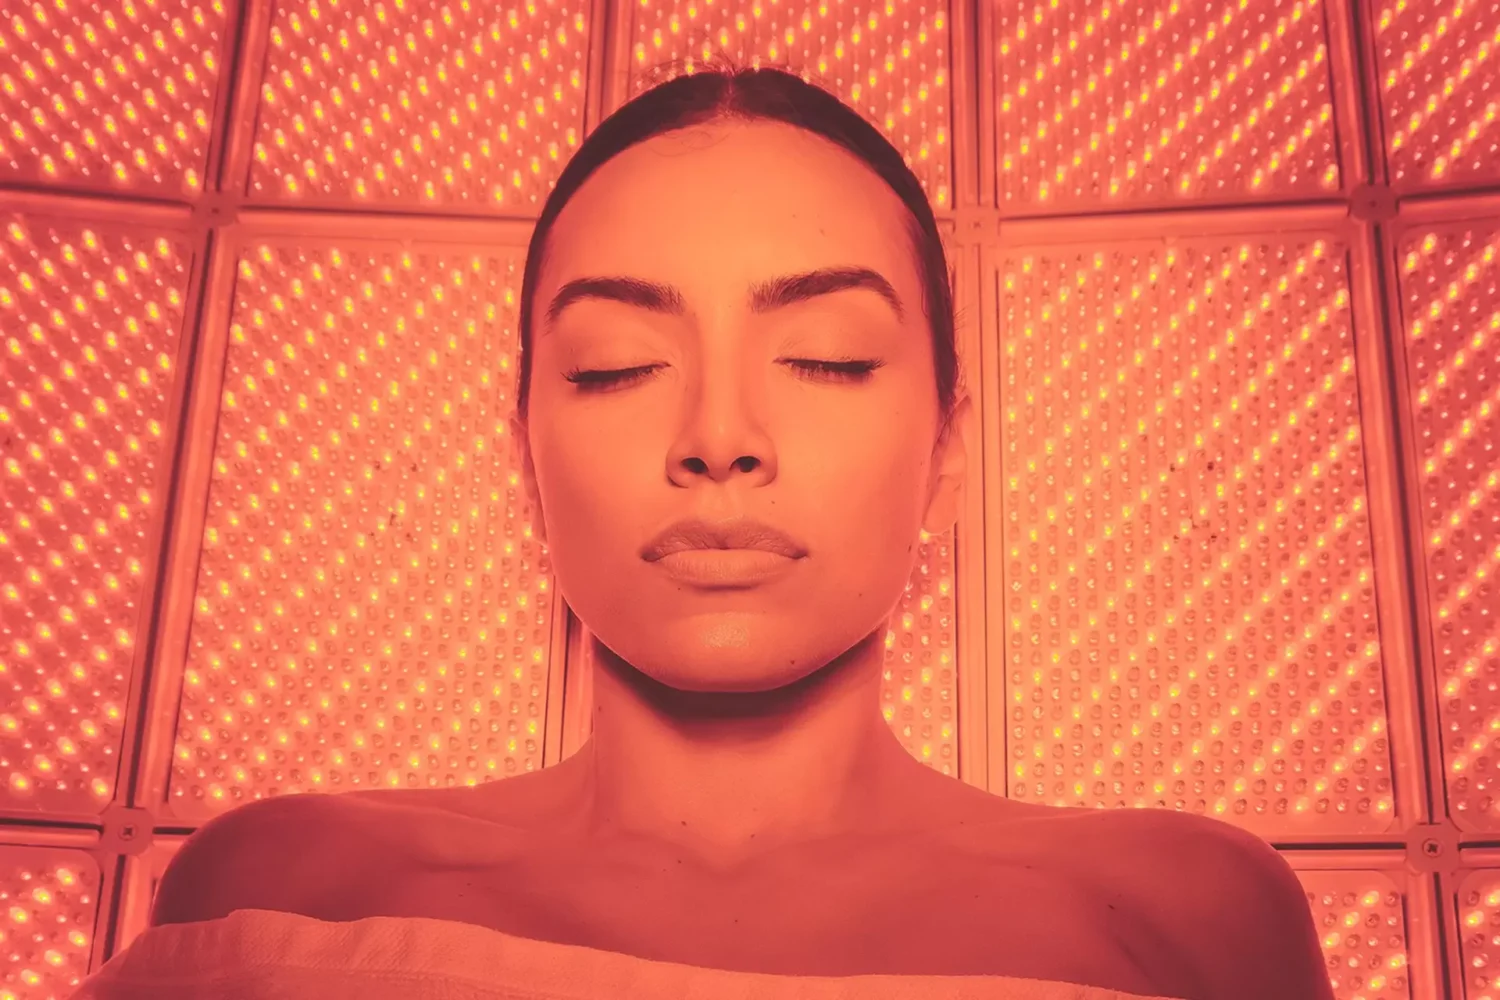 The Surprising Benefits of Red Light Therapy - Atlanta Celebrity News